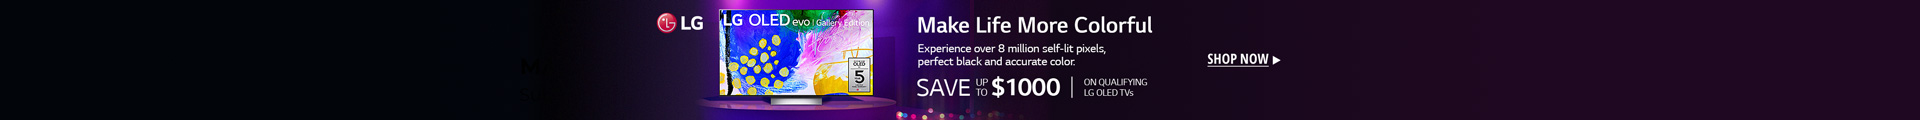 save up to $1000